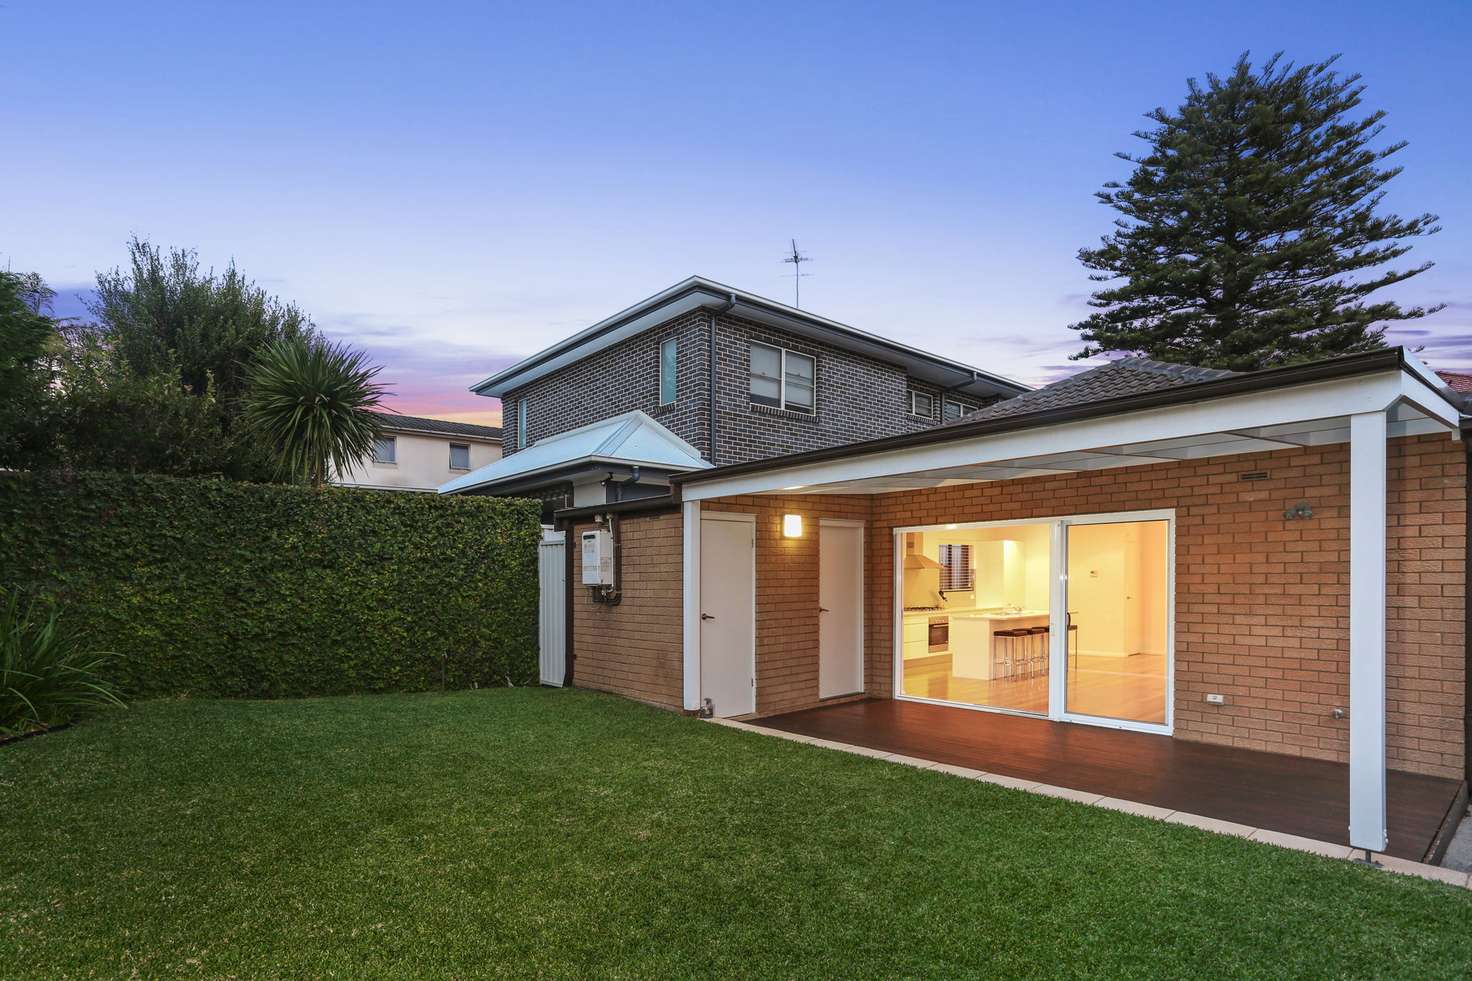 Main view of Homely house listing, 44 Green Street, Maroubra NSW 2035